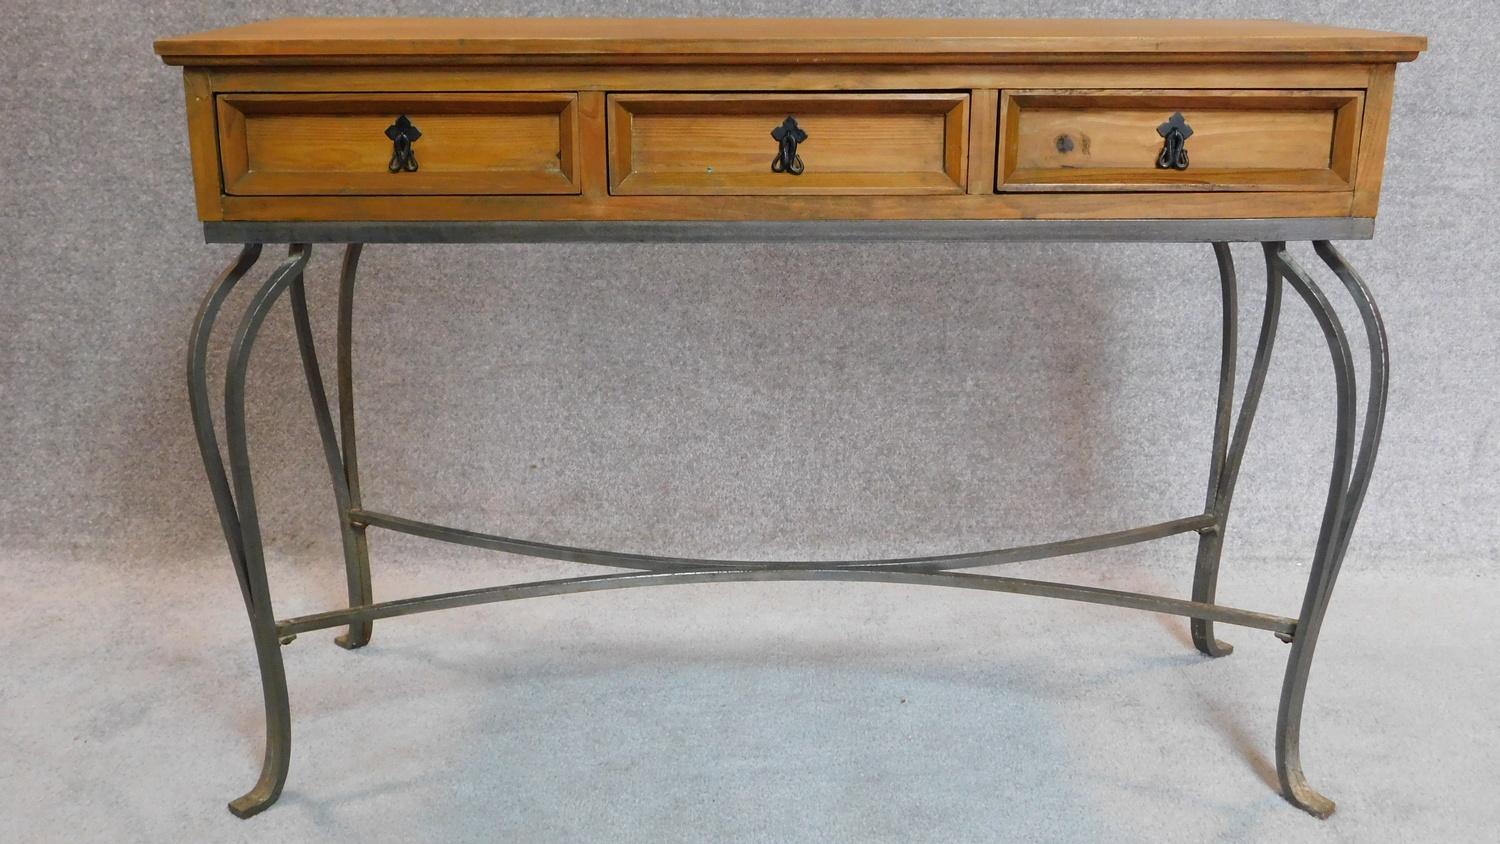 20th Century pitch pine console table with three drawers on cabriole wrought iron legs.